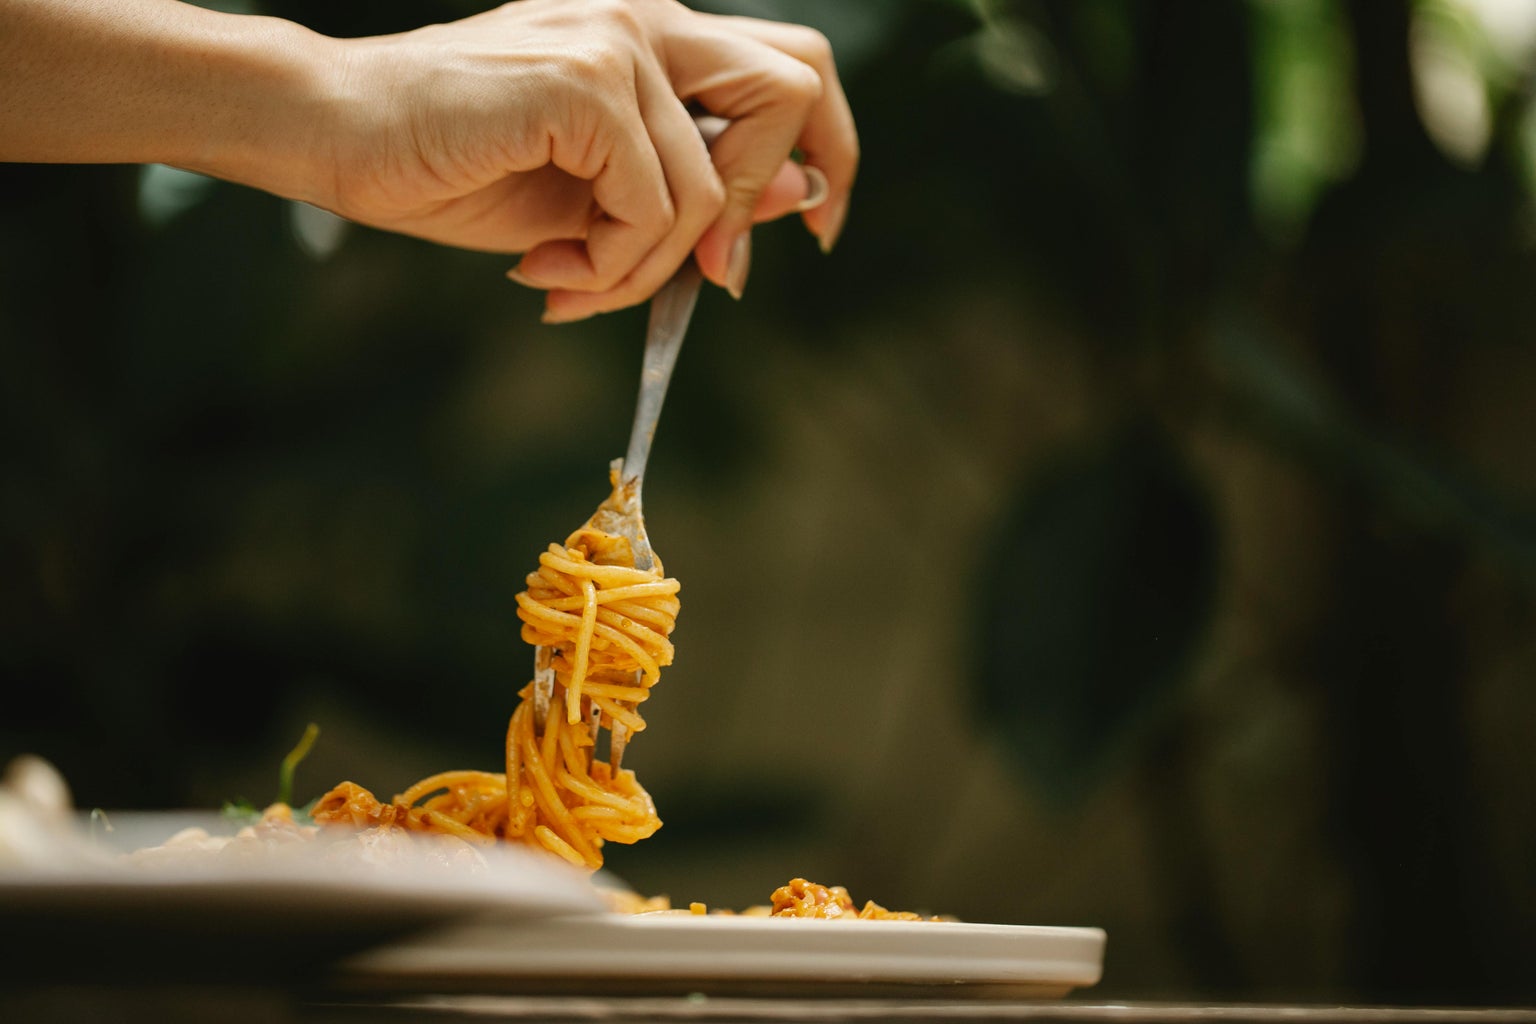 Hand twirling spaghetti on a fork over a plate of pasta.